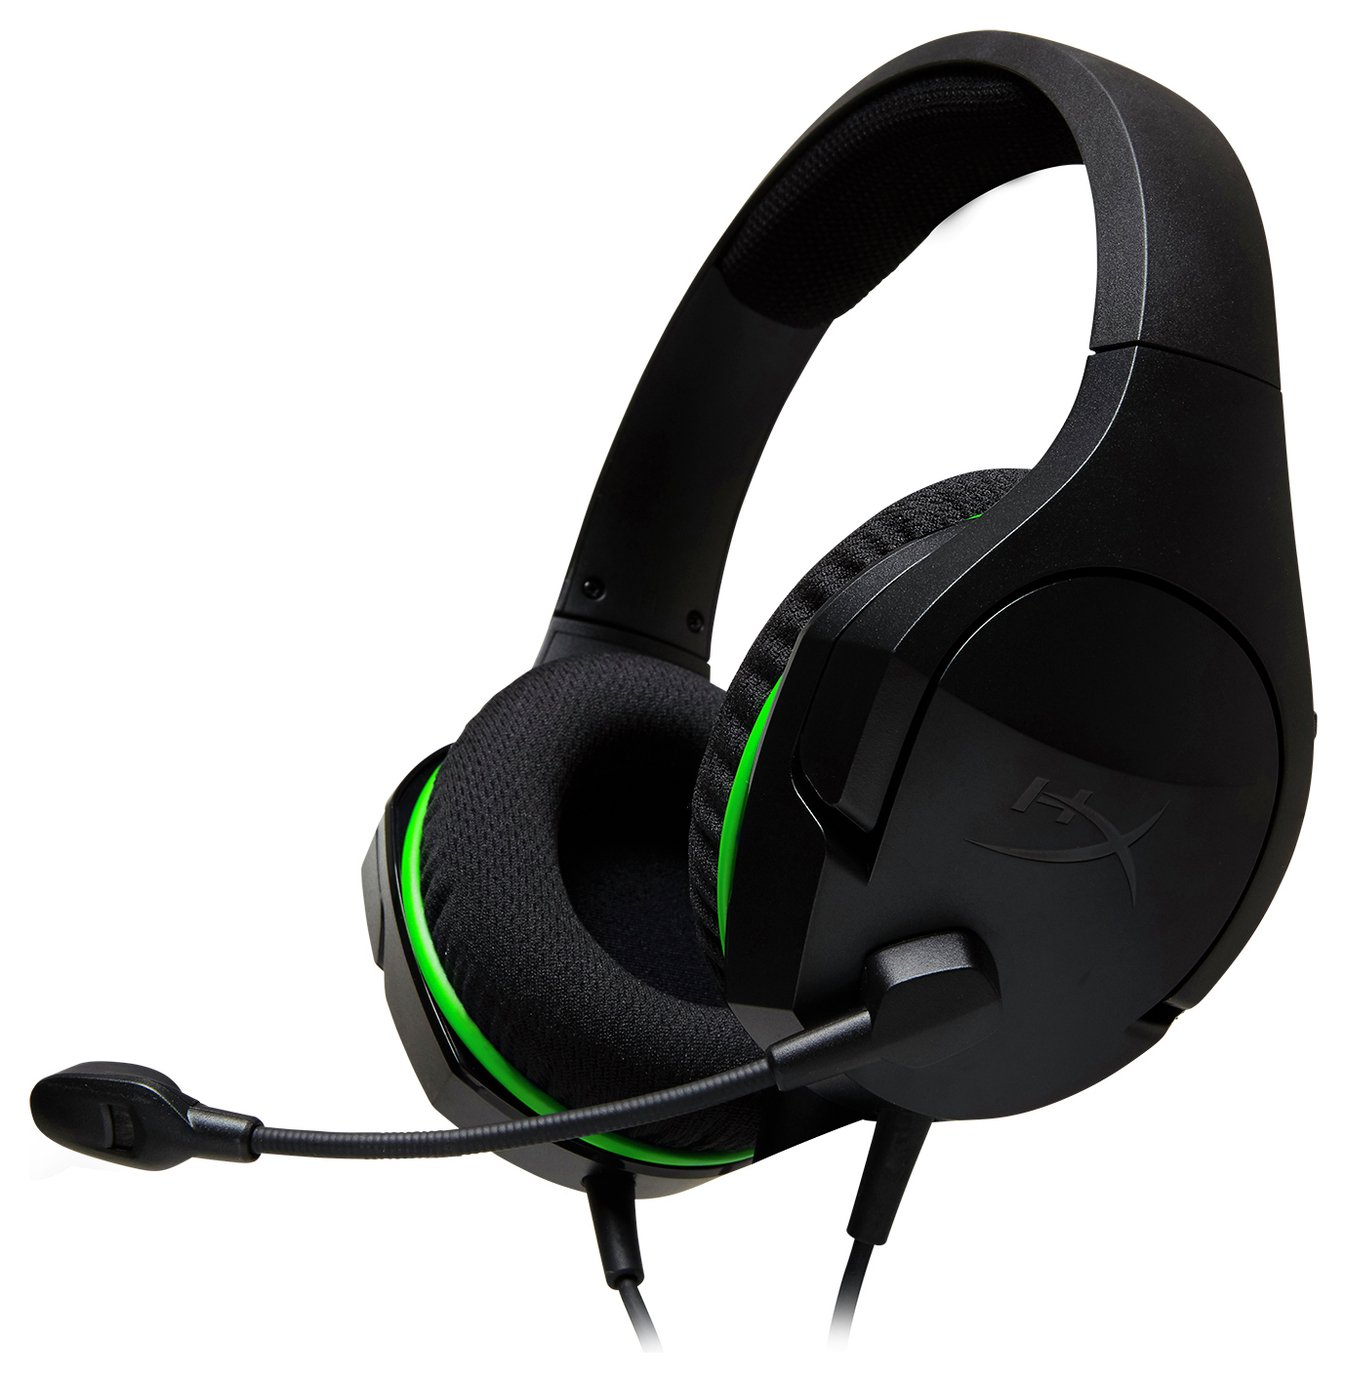 HyperX Cloud Stinger Core Xbox One Headset review